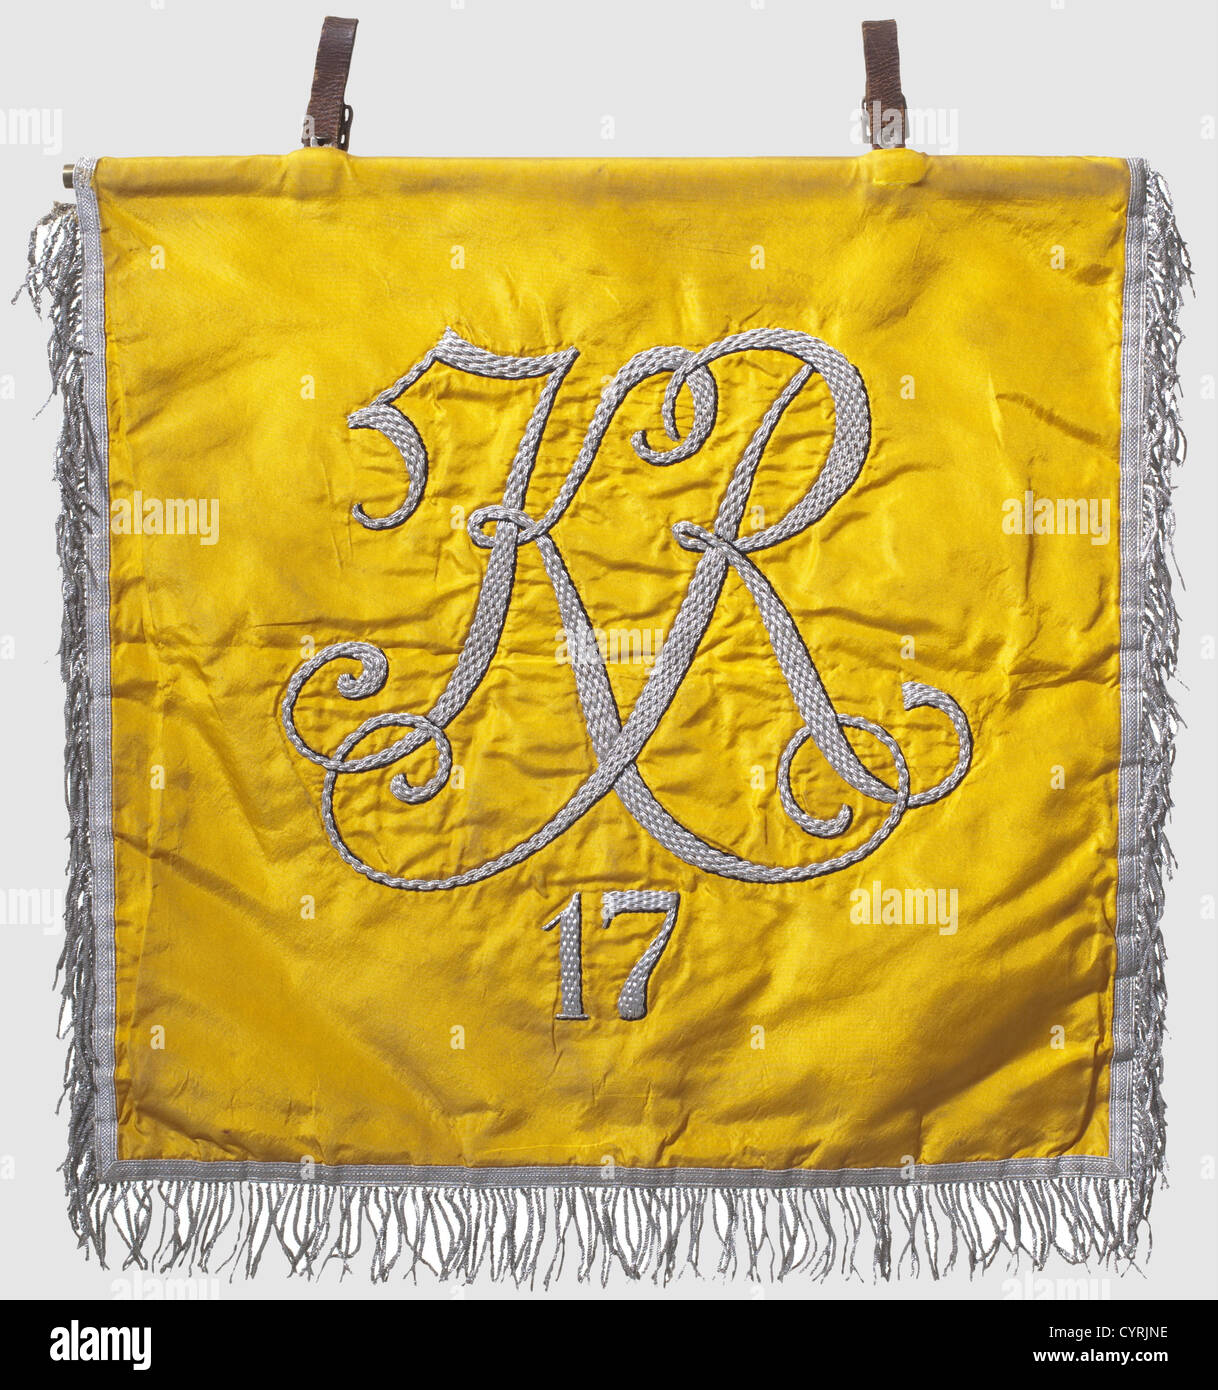 A trumpet banner,for the 17th cavalry regiment Golden yellow silk with a silver eagle embroidered on the front,the contours and feathers set off in black,the talons and the beak embroidered in gold.The reverse side displays the cipher 'KR 17' embroidered in silver.Silver fringe on three sides and two attachment loops.Vivid colour,slightly soiled.42 x 44 cm.The 17th(Bavarian)Mounted Regiment,the so-called 'Bamberger Reiter',was raised in 1920 in the VII Defense District and belonged to the 7th Reichswehr Division.The squadrons were stationed in Bam,Additional-Rights-Clearences-Not Available Stock Photo